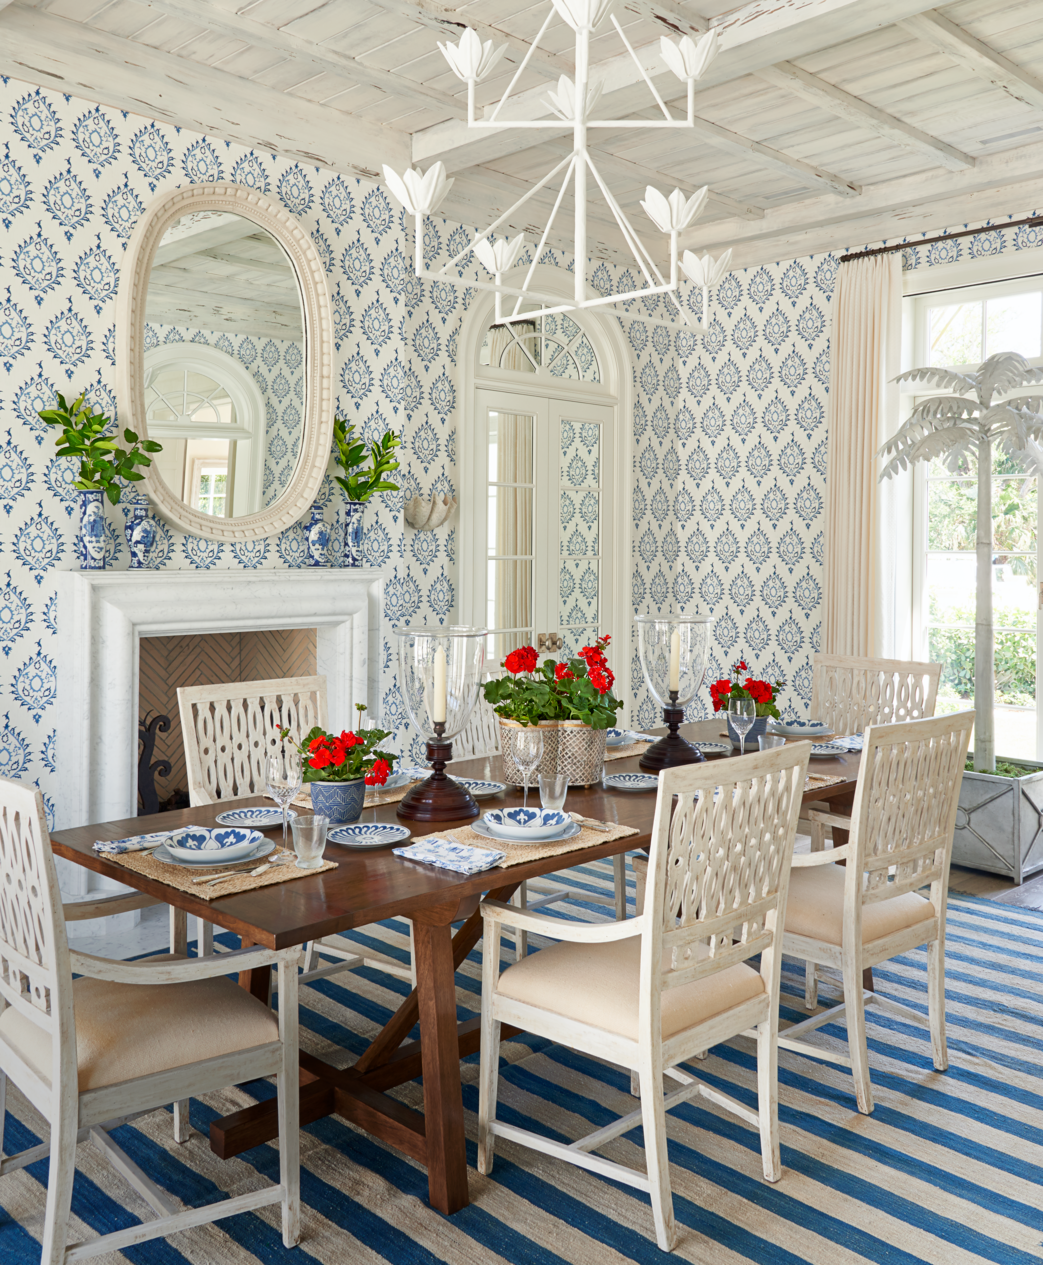 6 Dining Room Wallpaper Ideas That Can Transform The Space